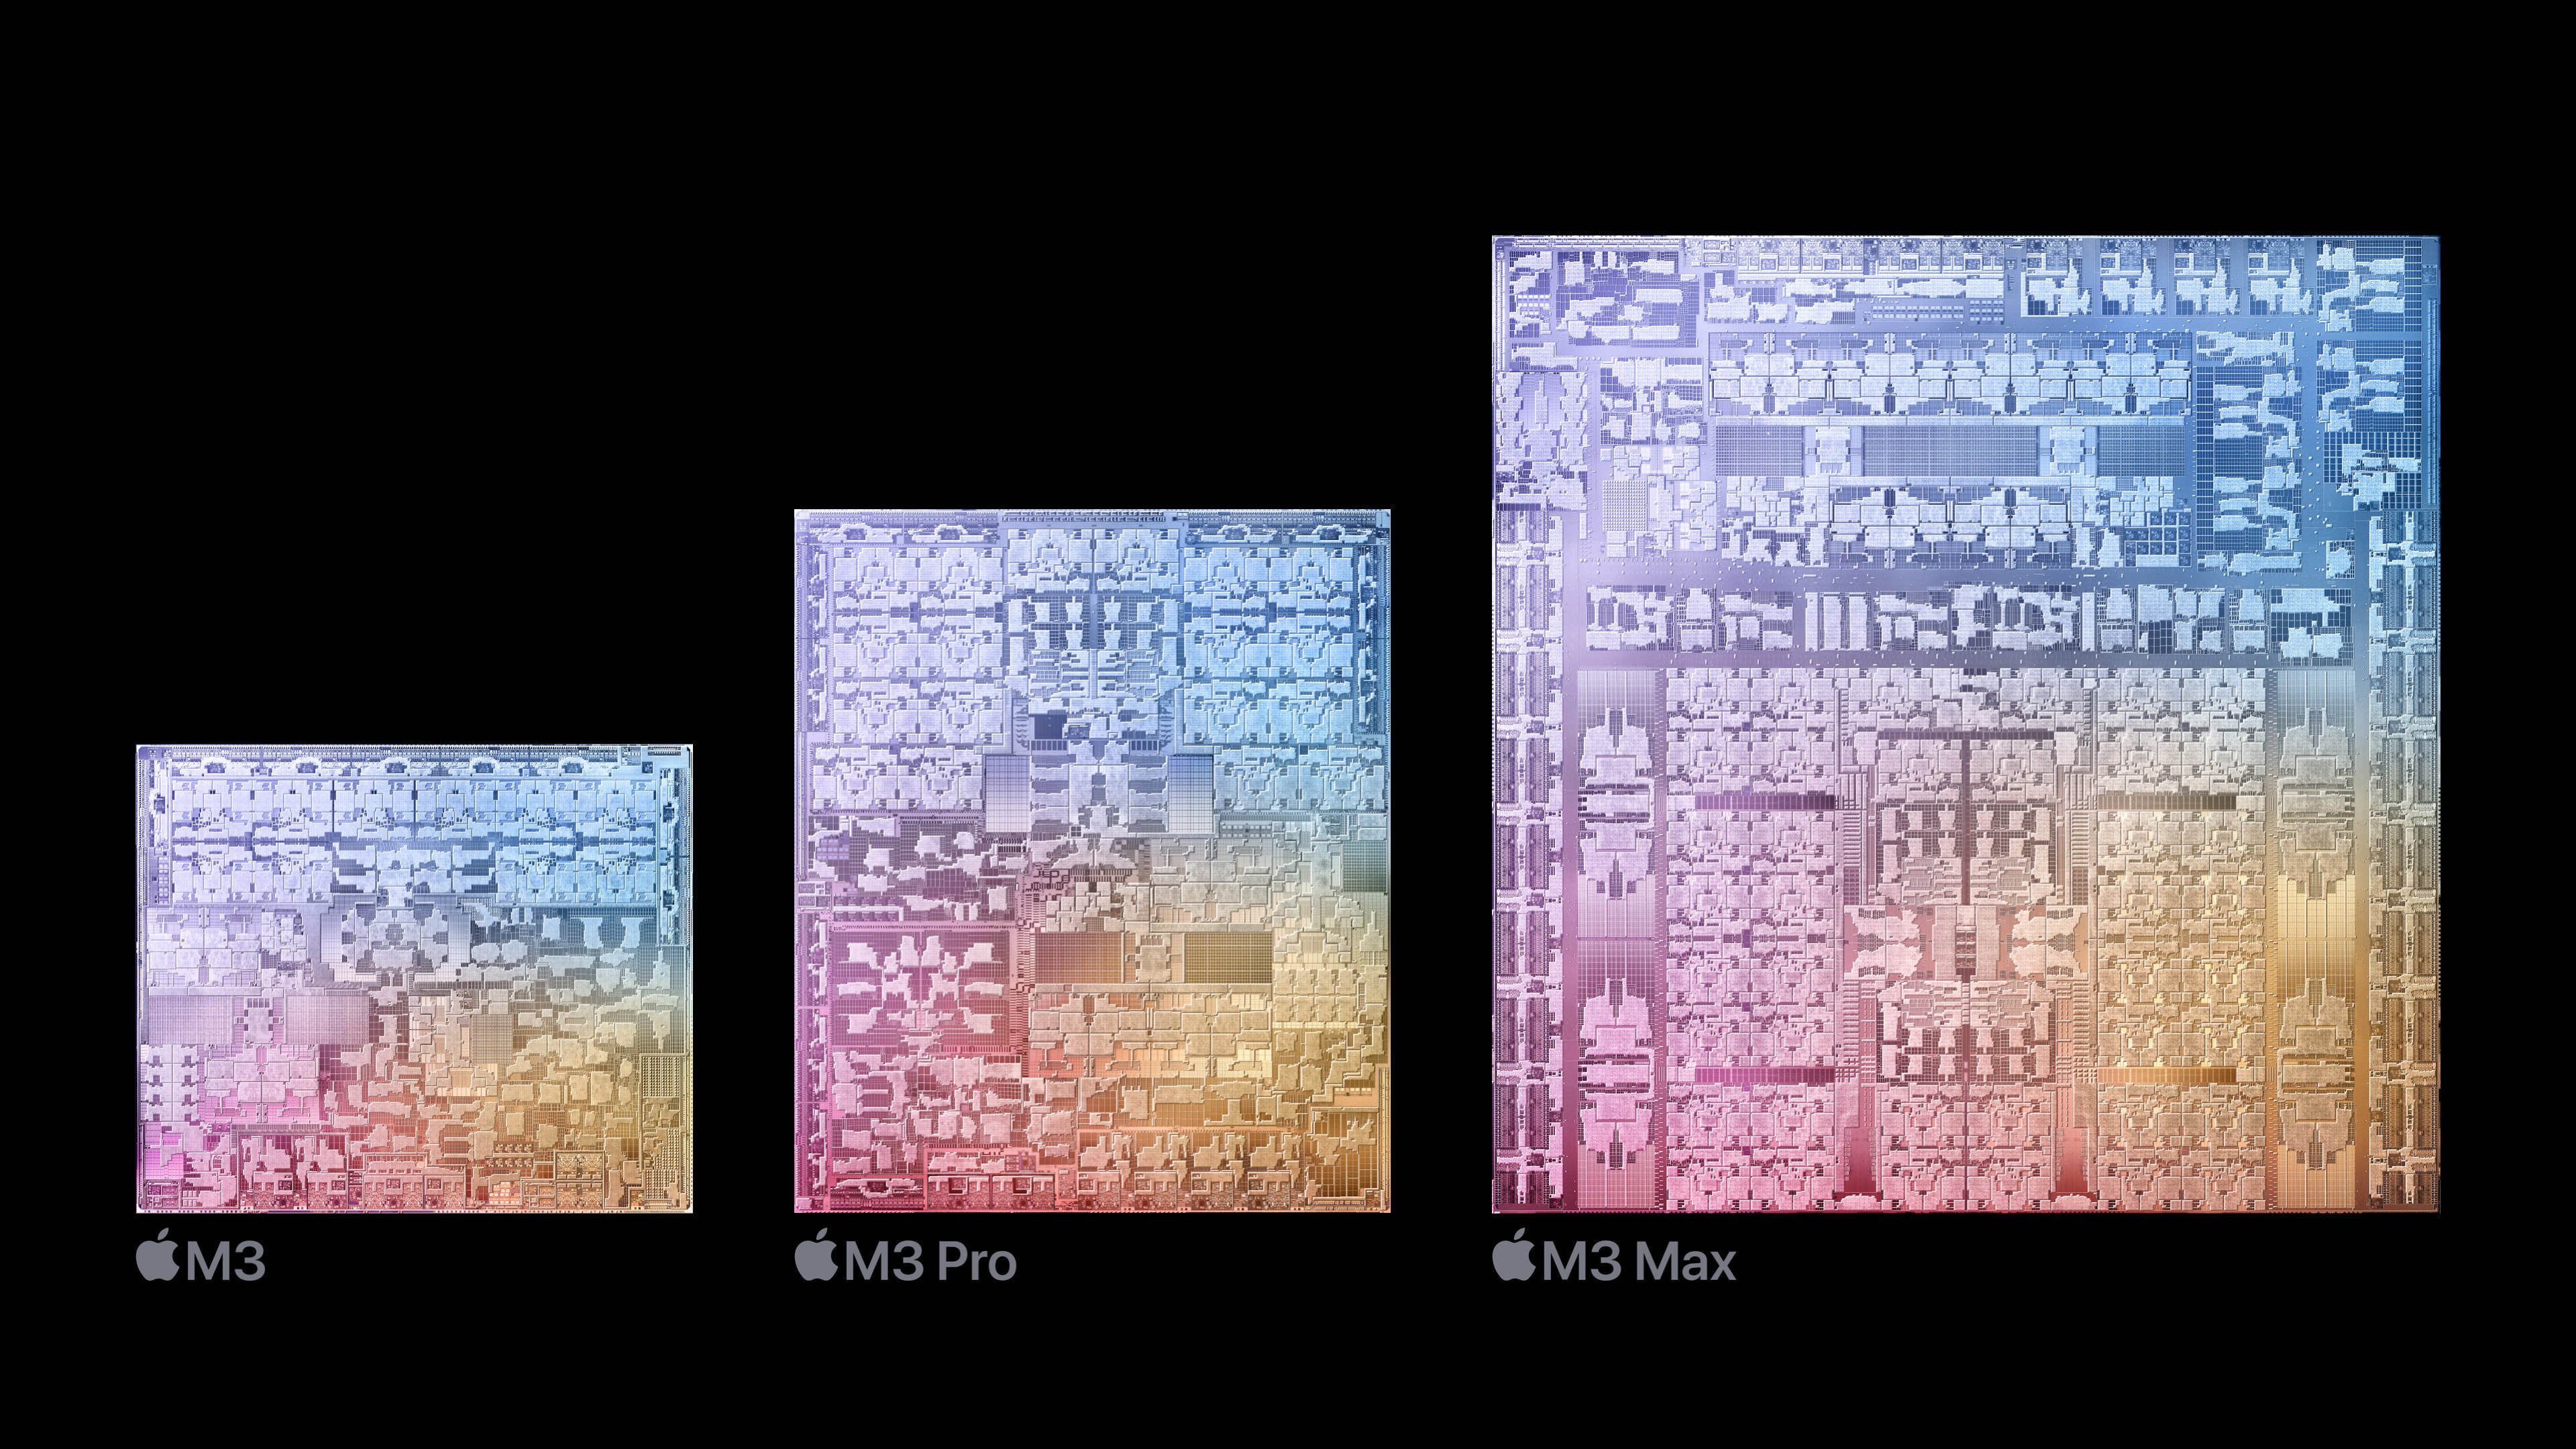 Apple says its M3 family of chips is built using the industry-leading 3-nanometer process technology. Photo: Handout